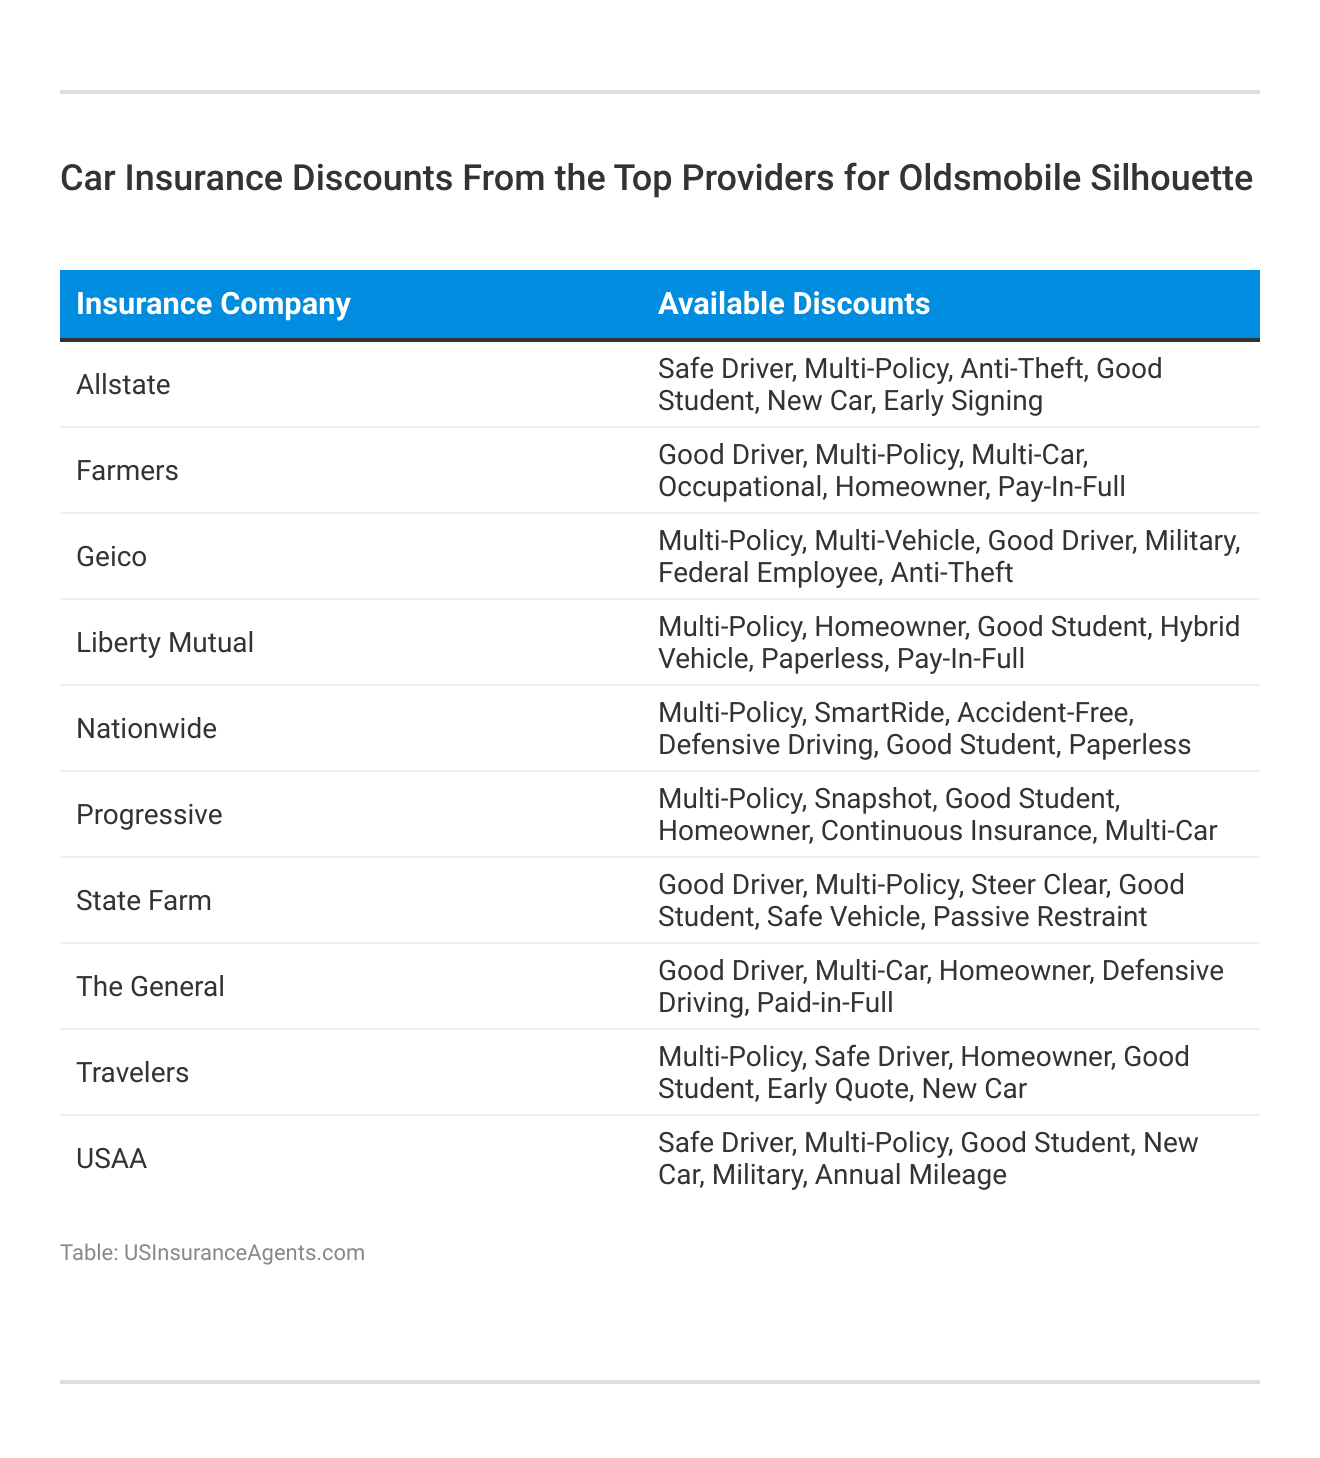 <h3>Car Insurance Discounts From the Top Providers for Oldsmobile Silhouette</h3>